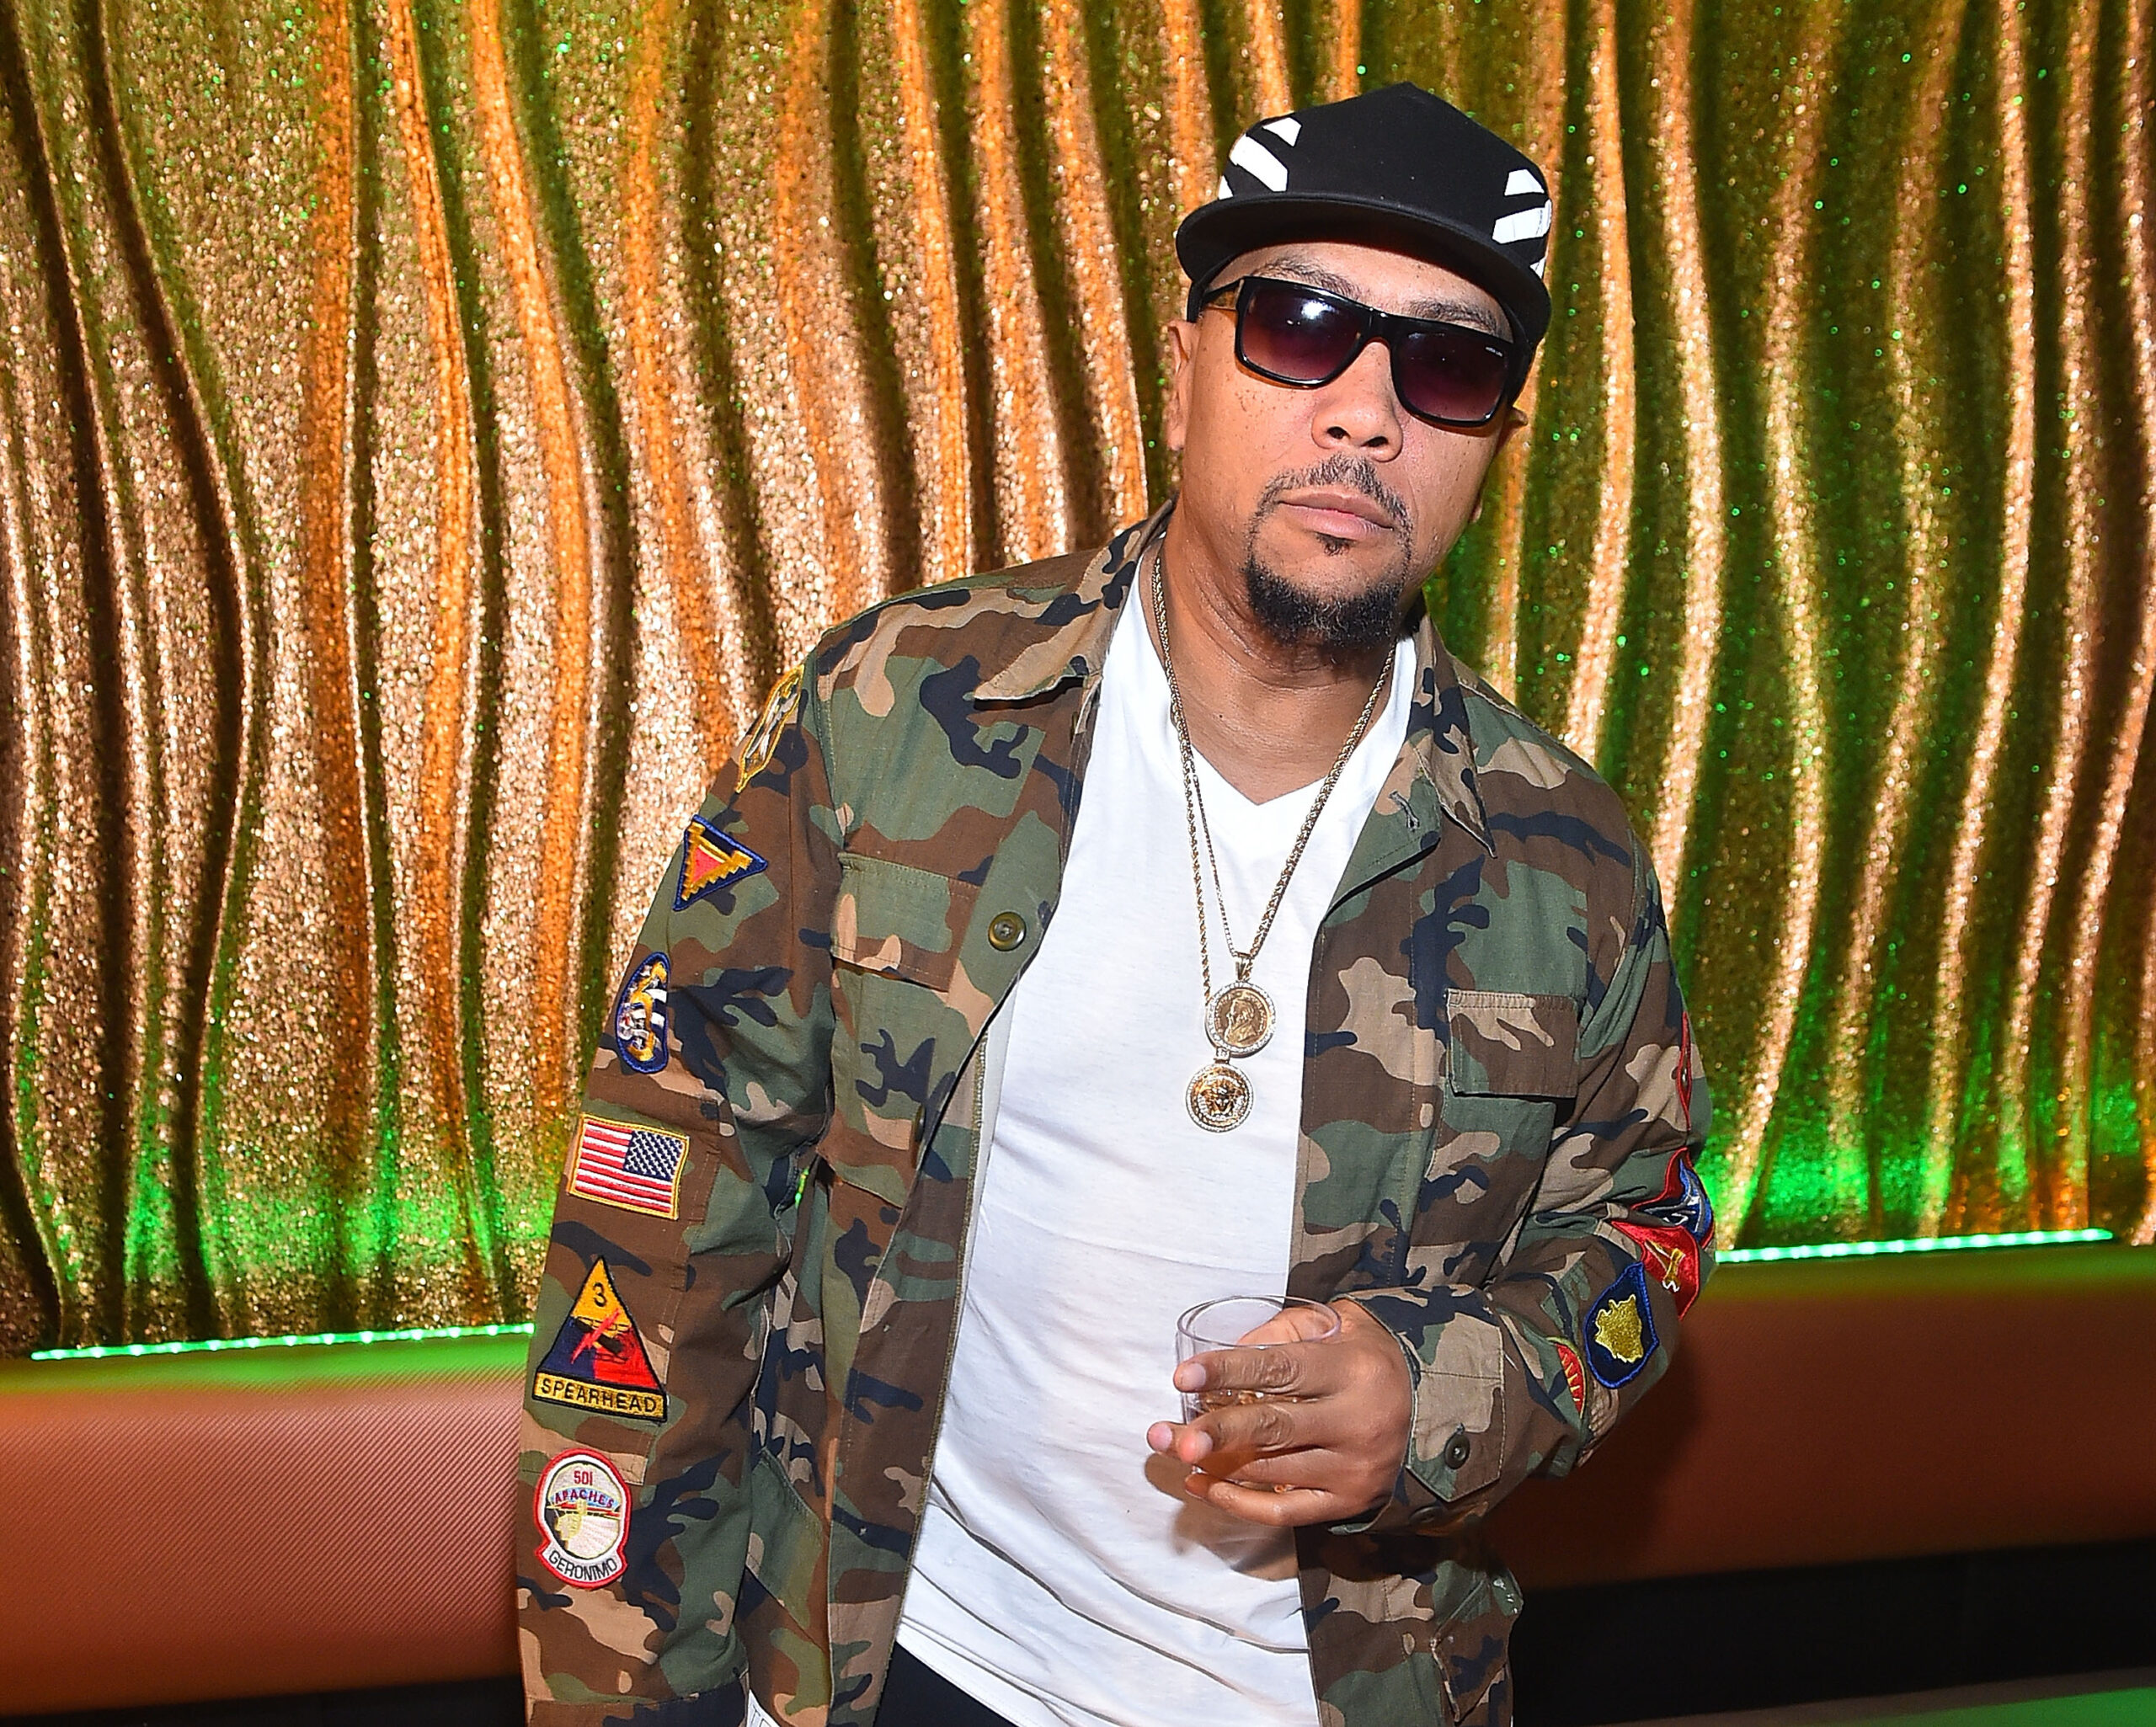 Timbaland Details What Fans Can Expect From “Verzuz” Season 3